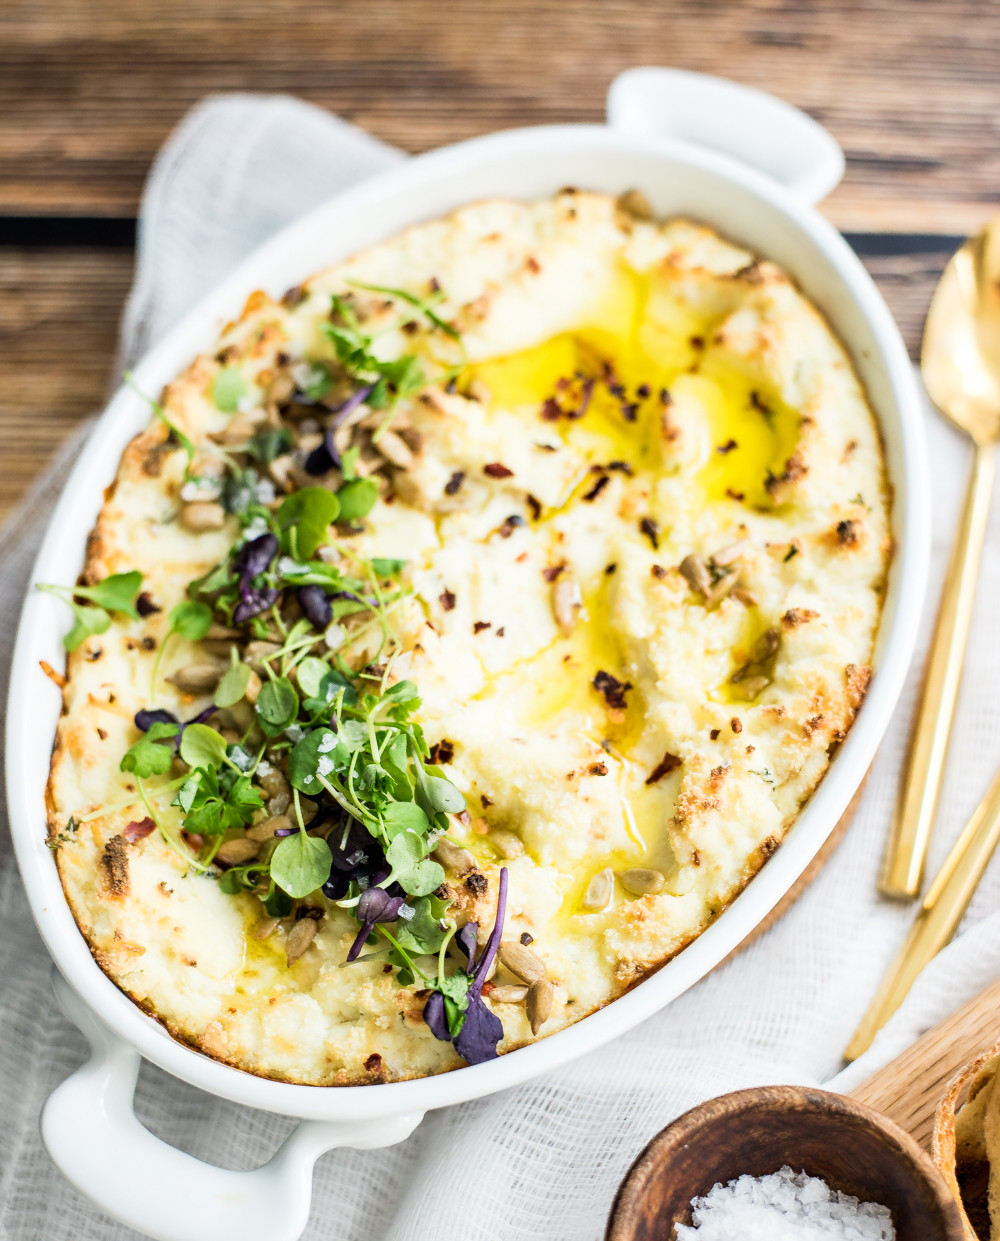 Ricotta Cheese Appetizers Inspirational Baked Ricotta Cheese Dip with Garlic and Thyme Cooking